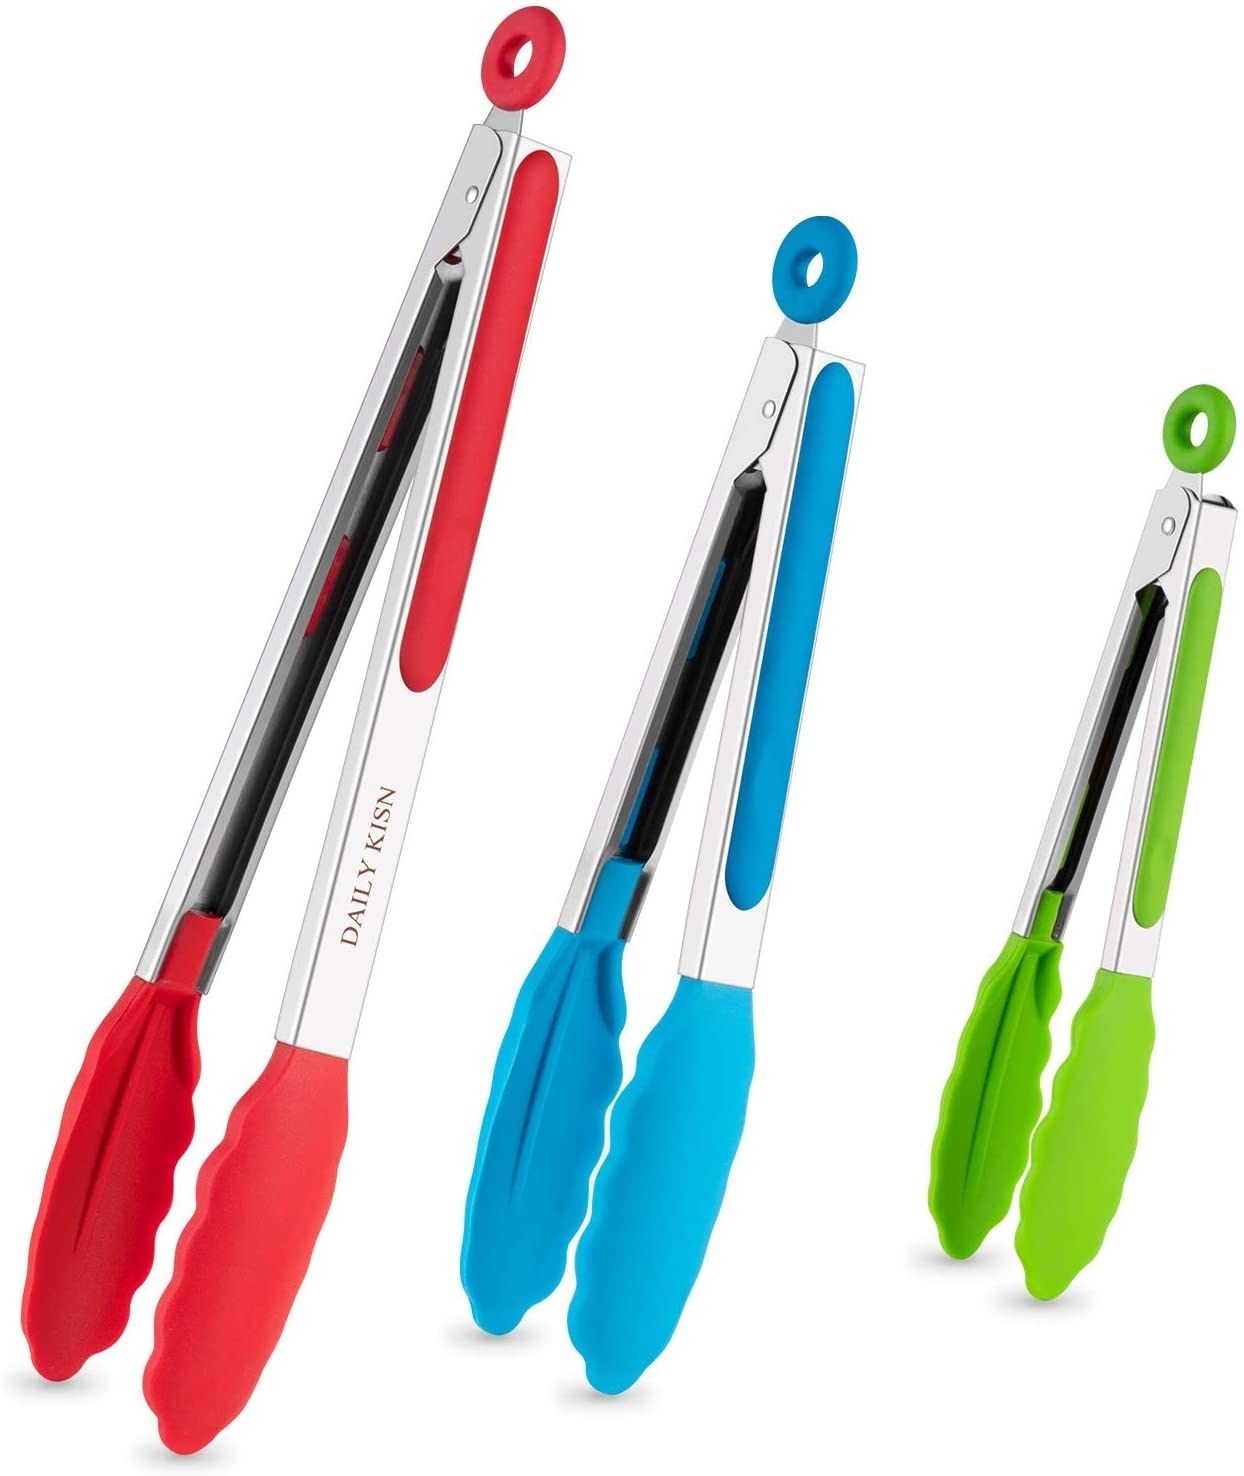 three kitchen tongs in three sizes and colors red, blue, and green